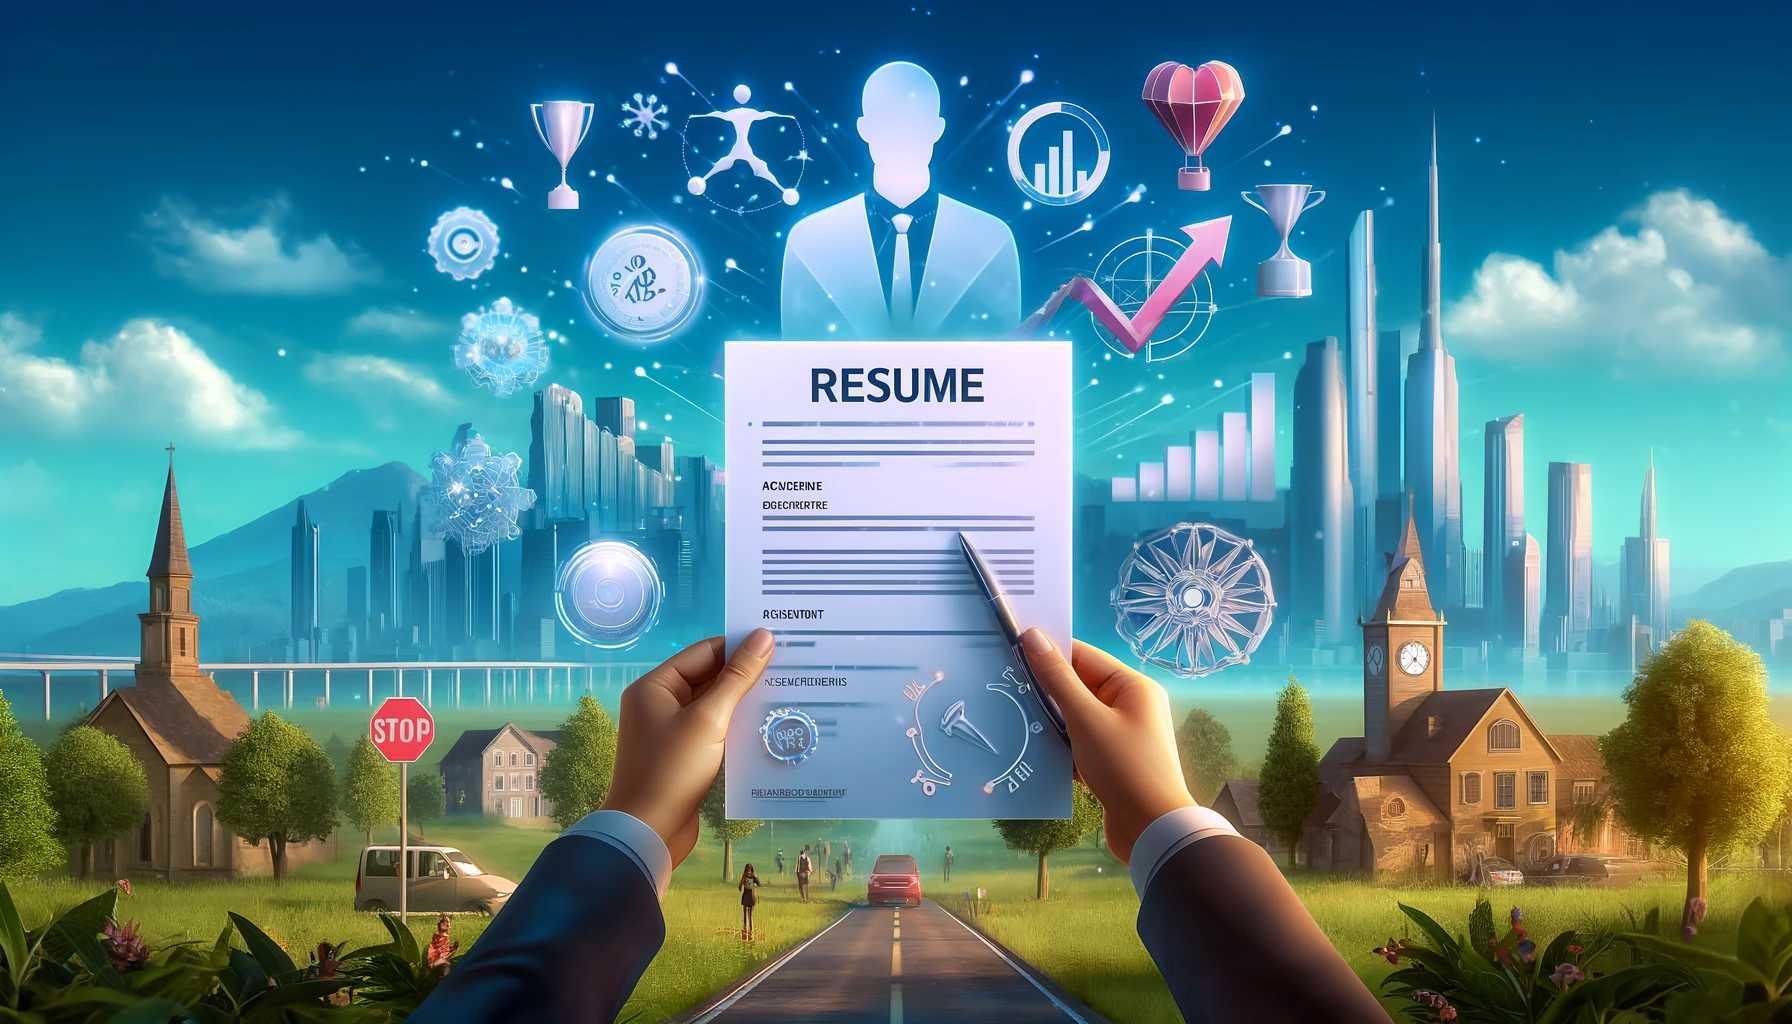 Resume Writing: Quantifying Your Value to Land Your Dream Job